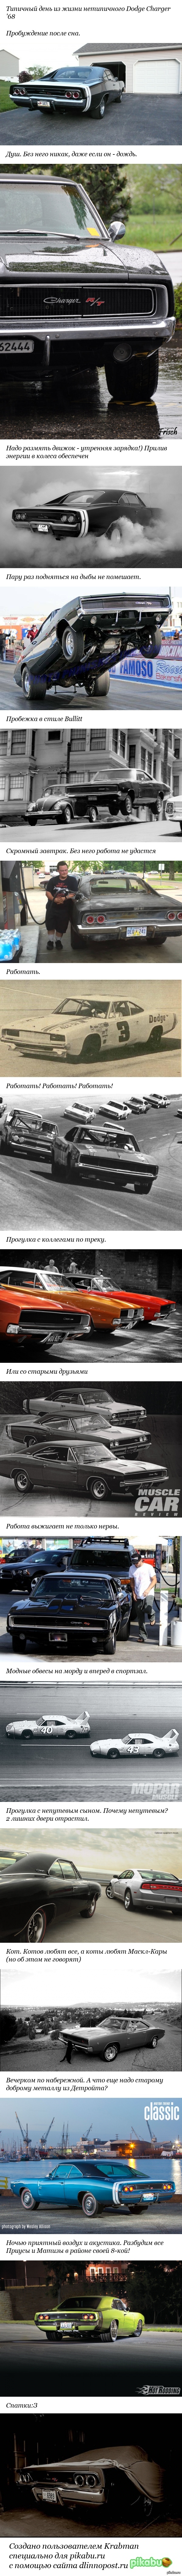 Charger 1968 